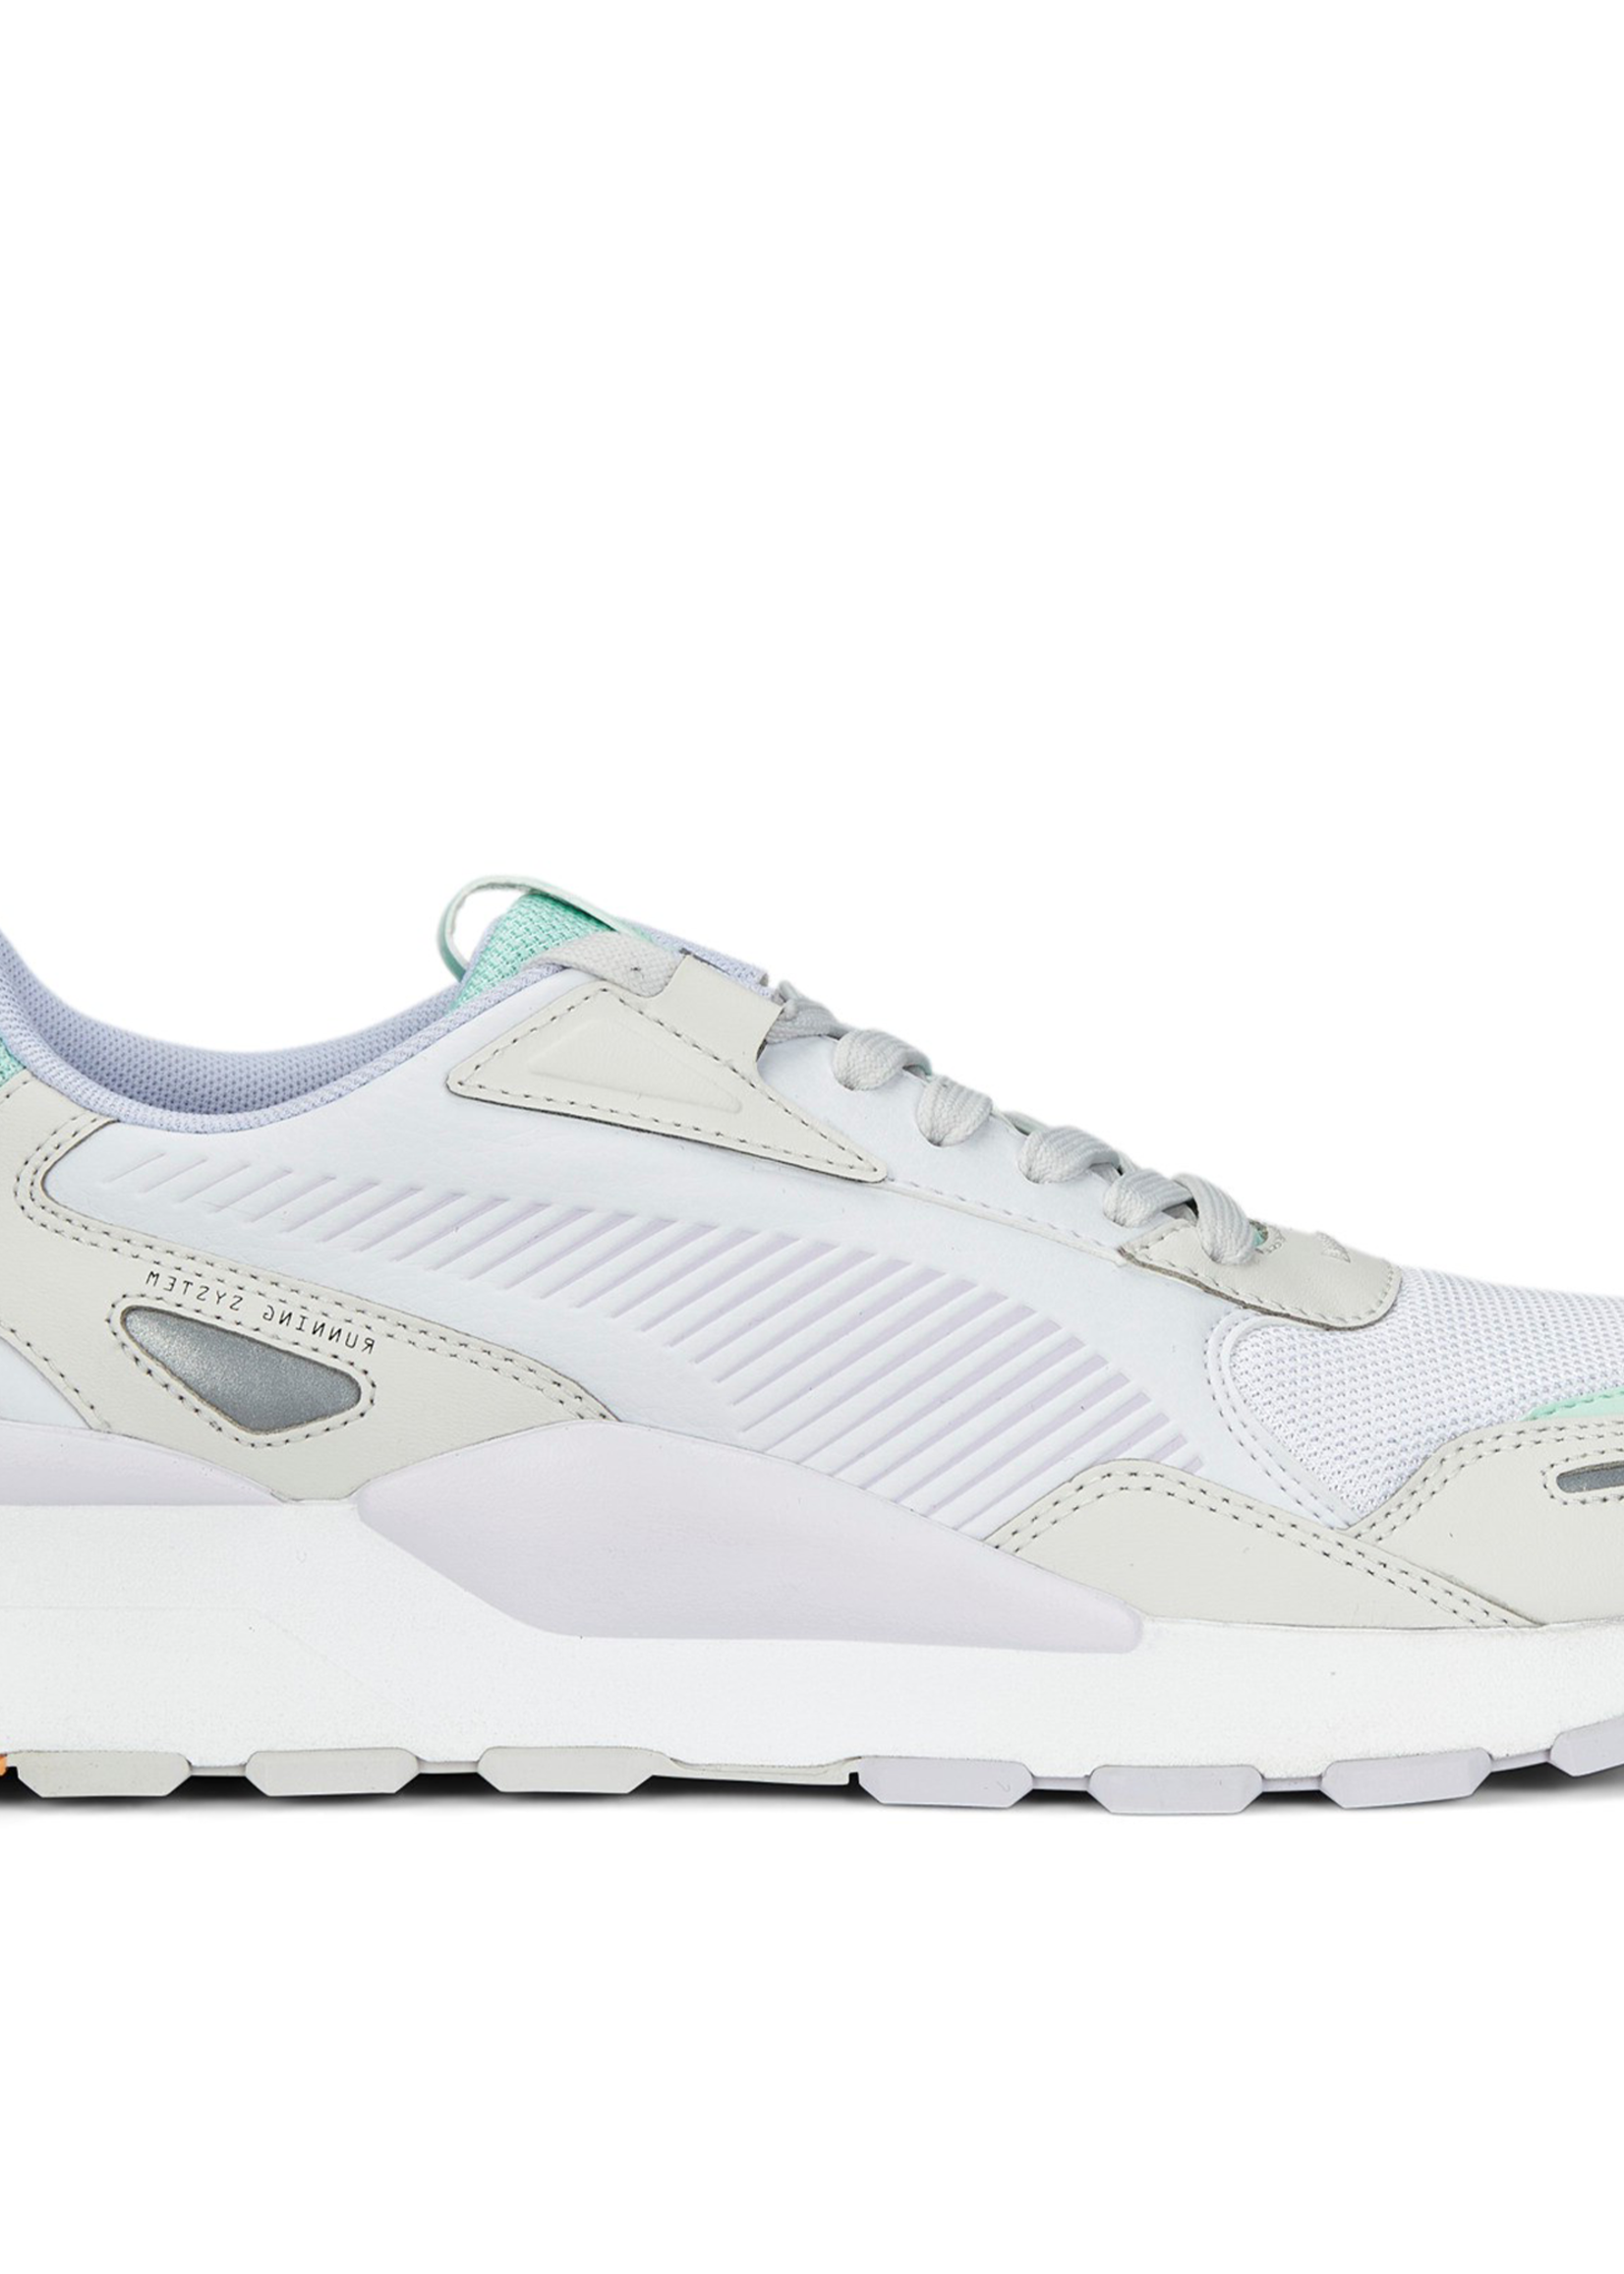 Puma Rs 3.0 Synth Pop White Mint